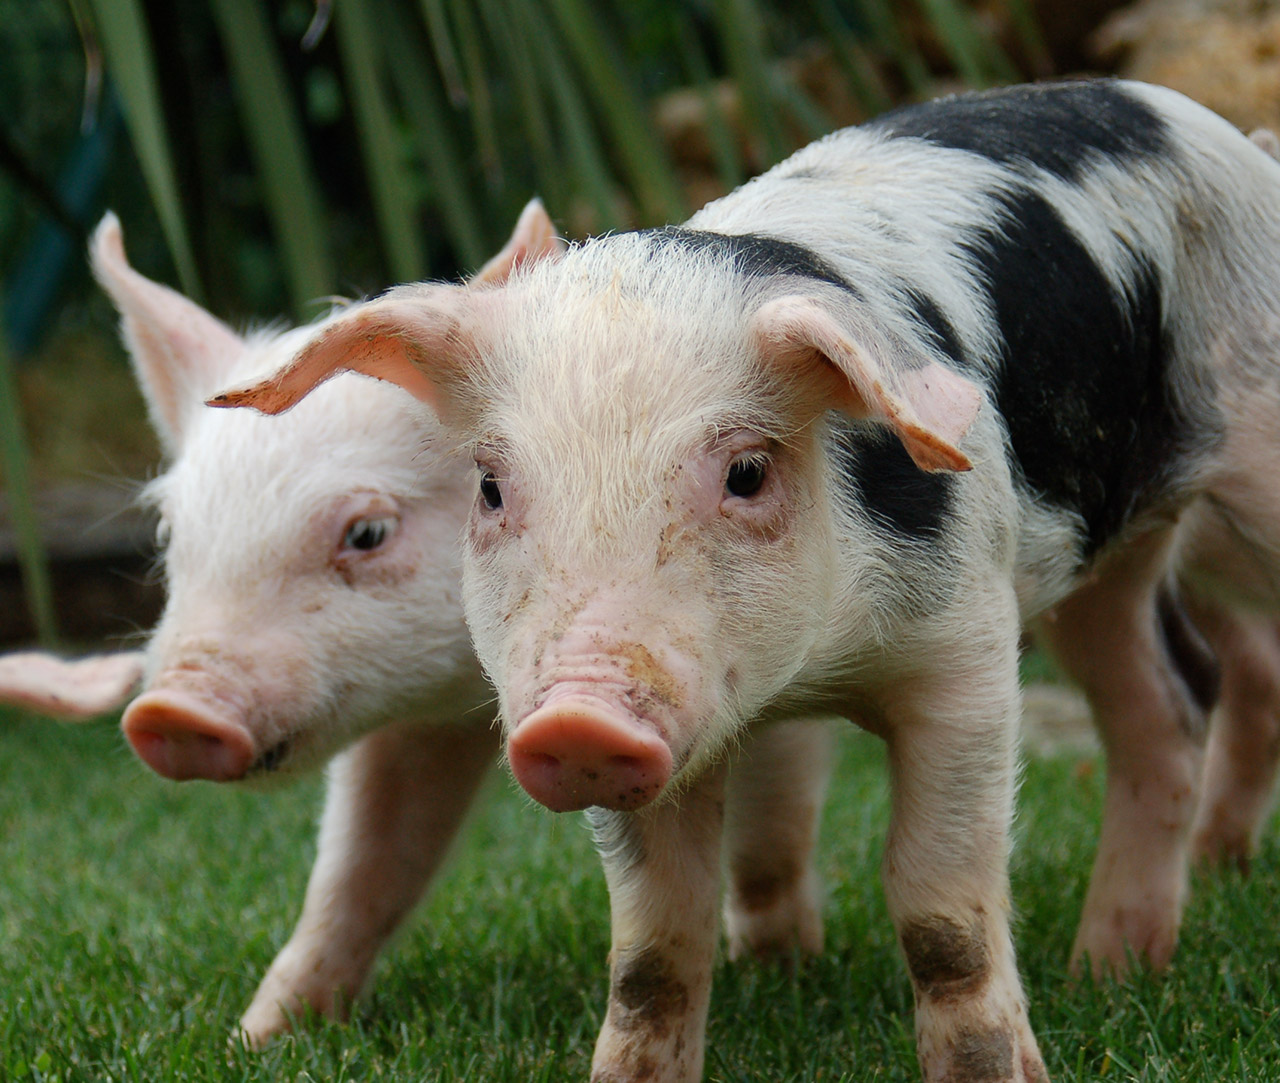 Two rescued piglets